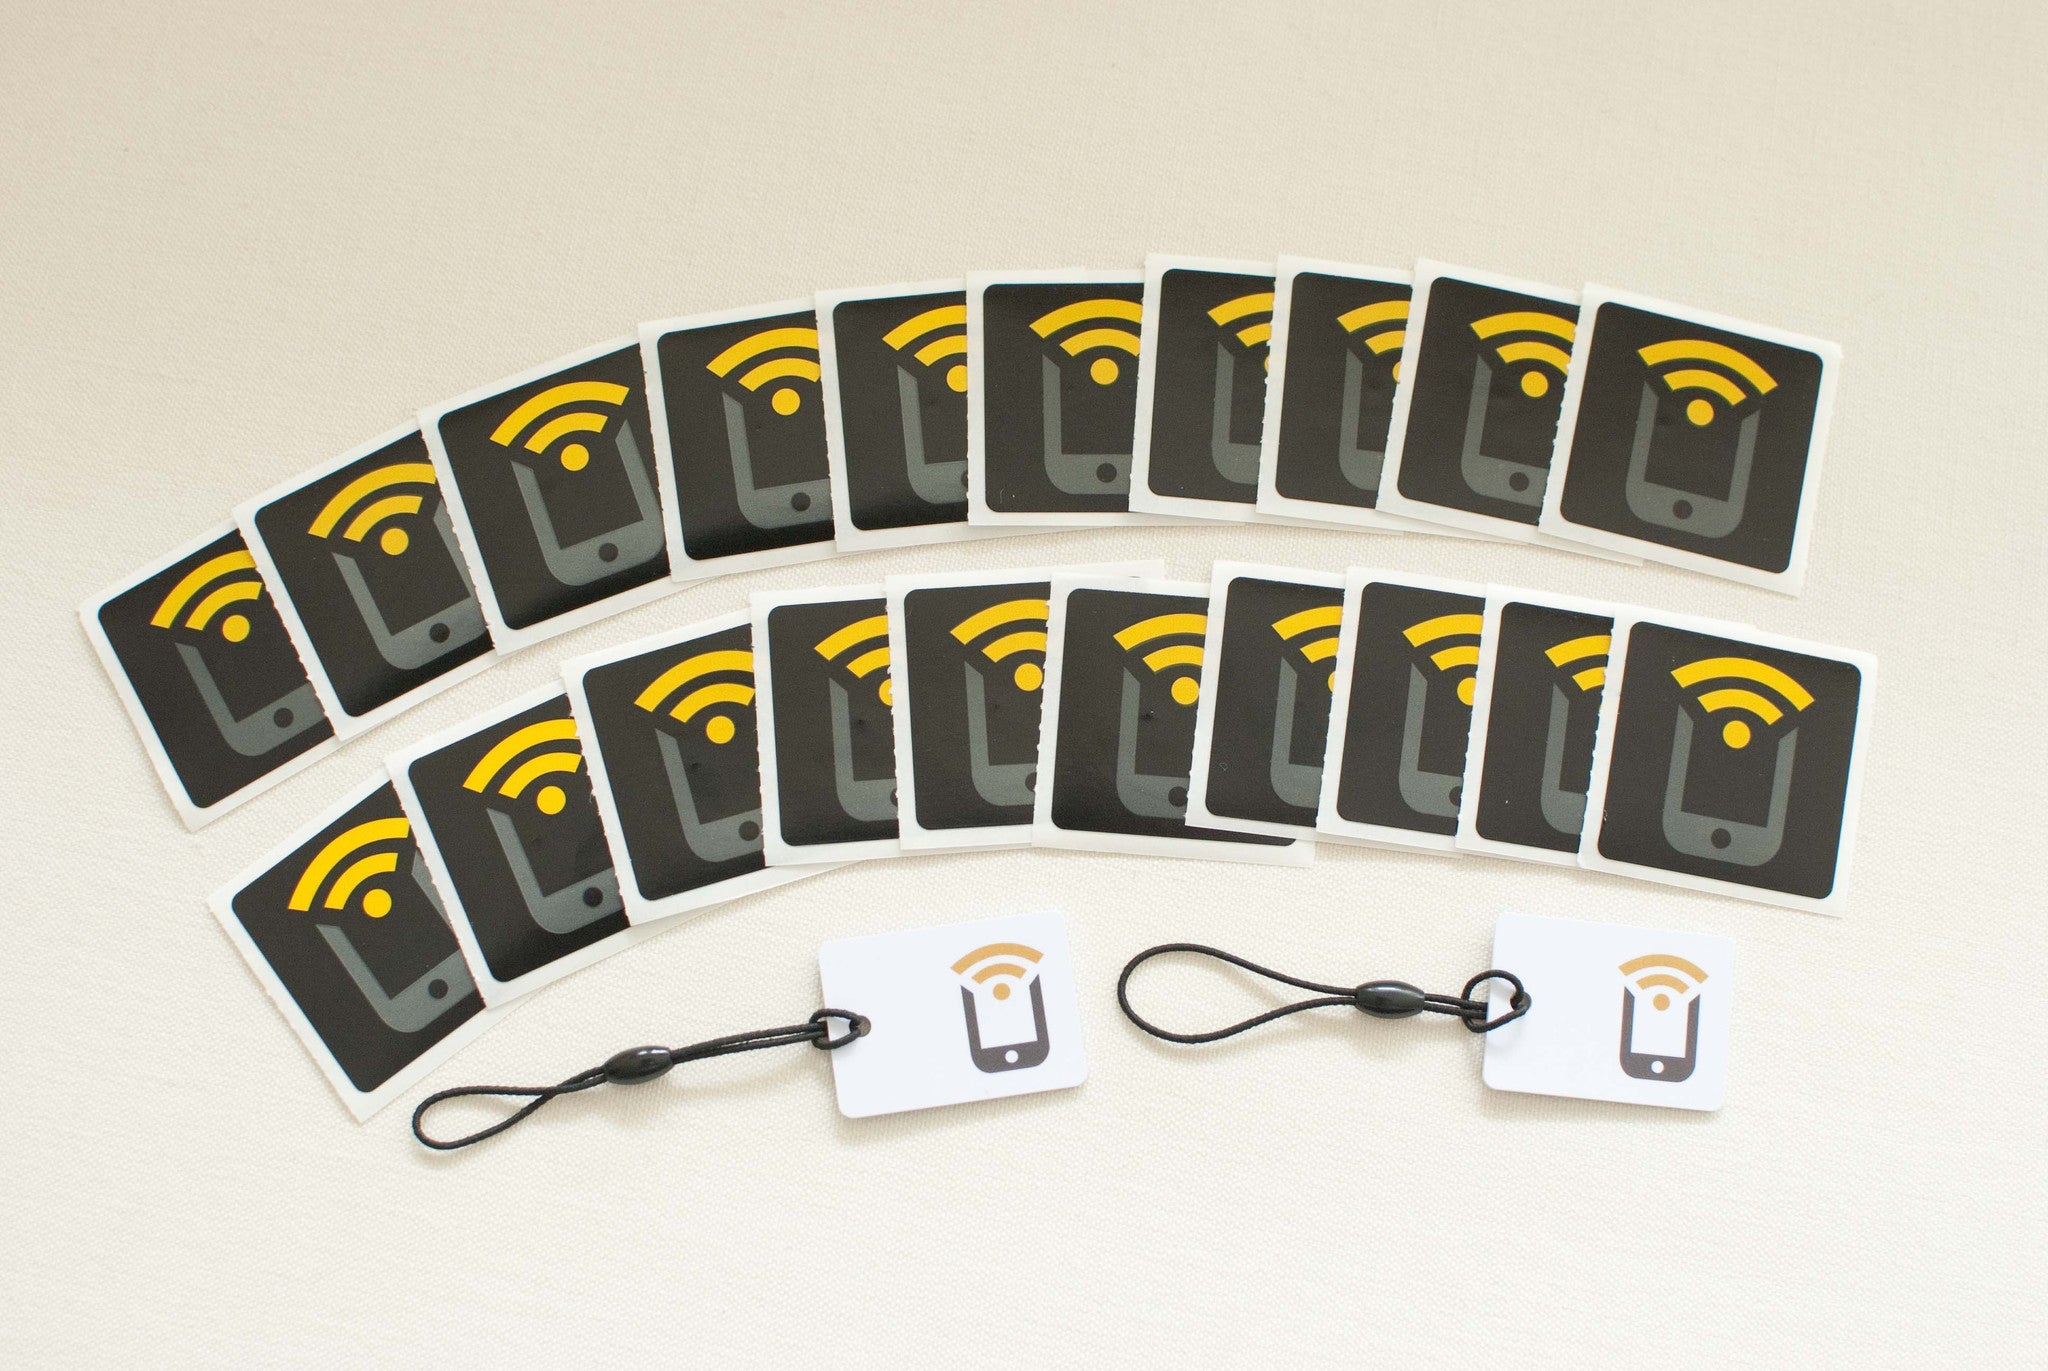 NFC Task Launcher Combo Pack (20 Black Stickers + 2 Keychains)